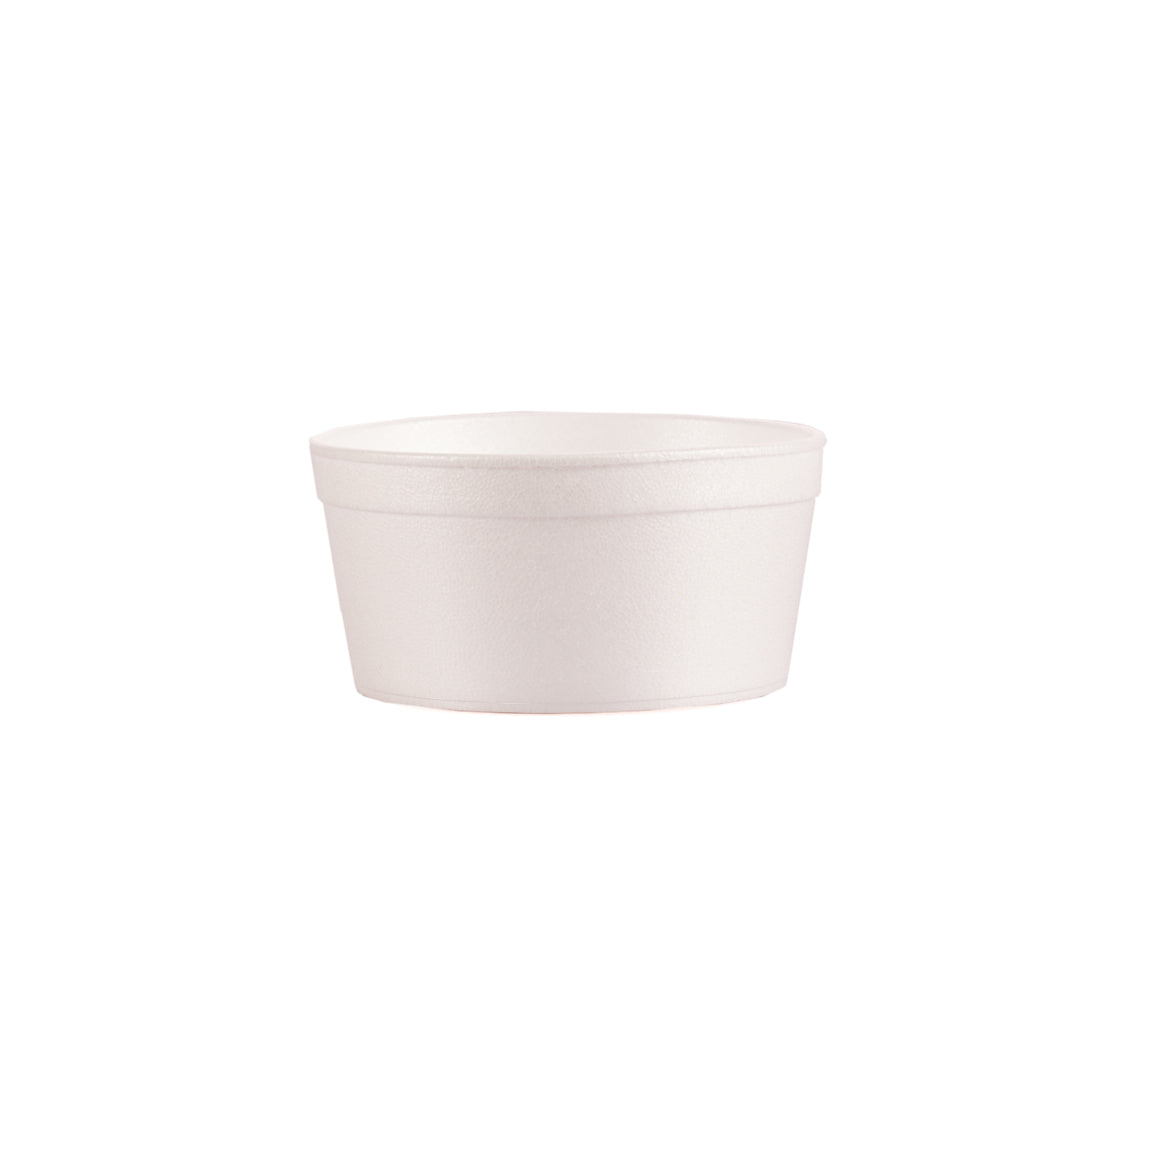 8oz Foam Container "WInCup"